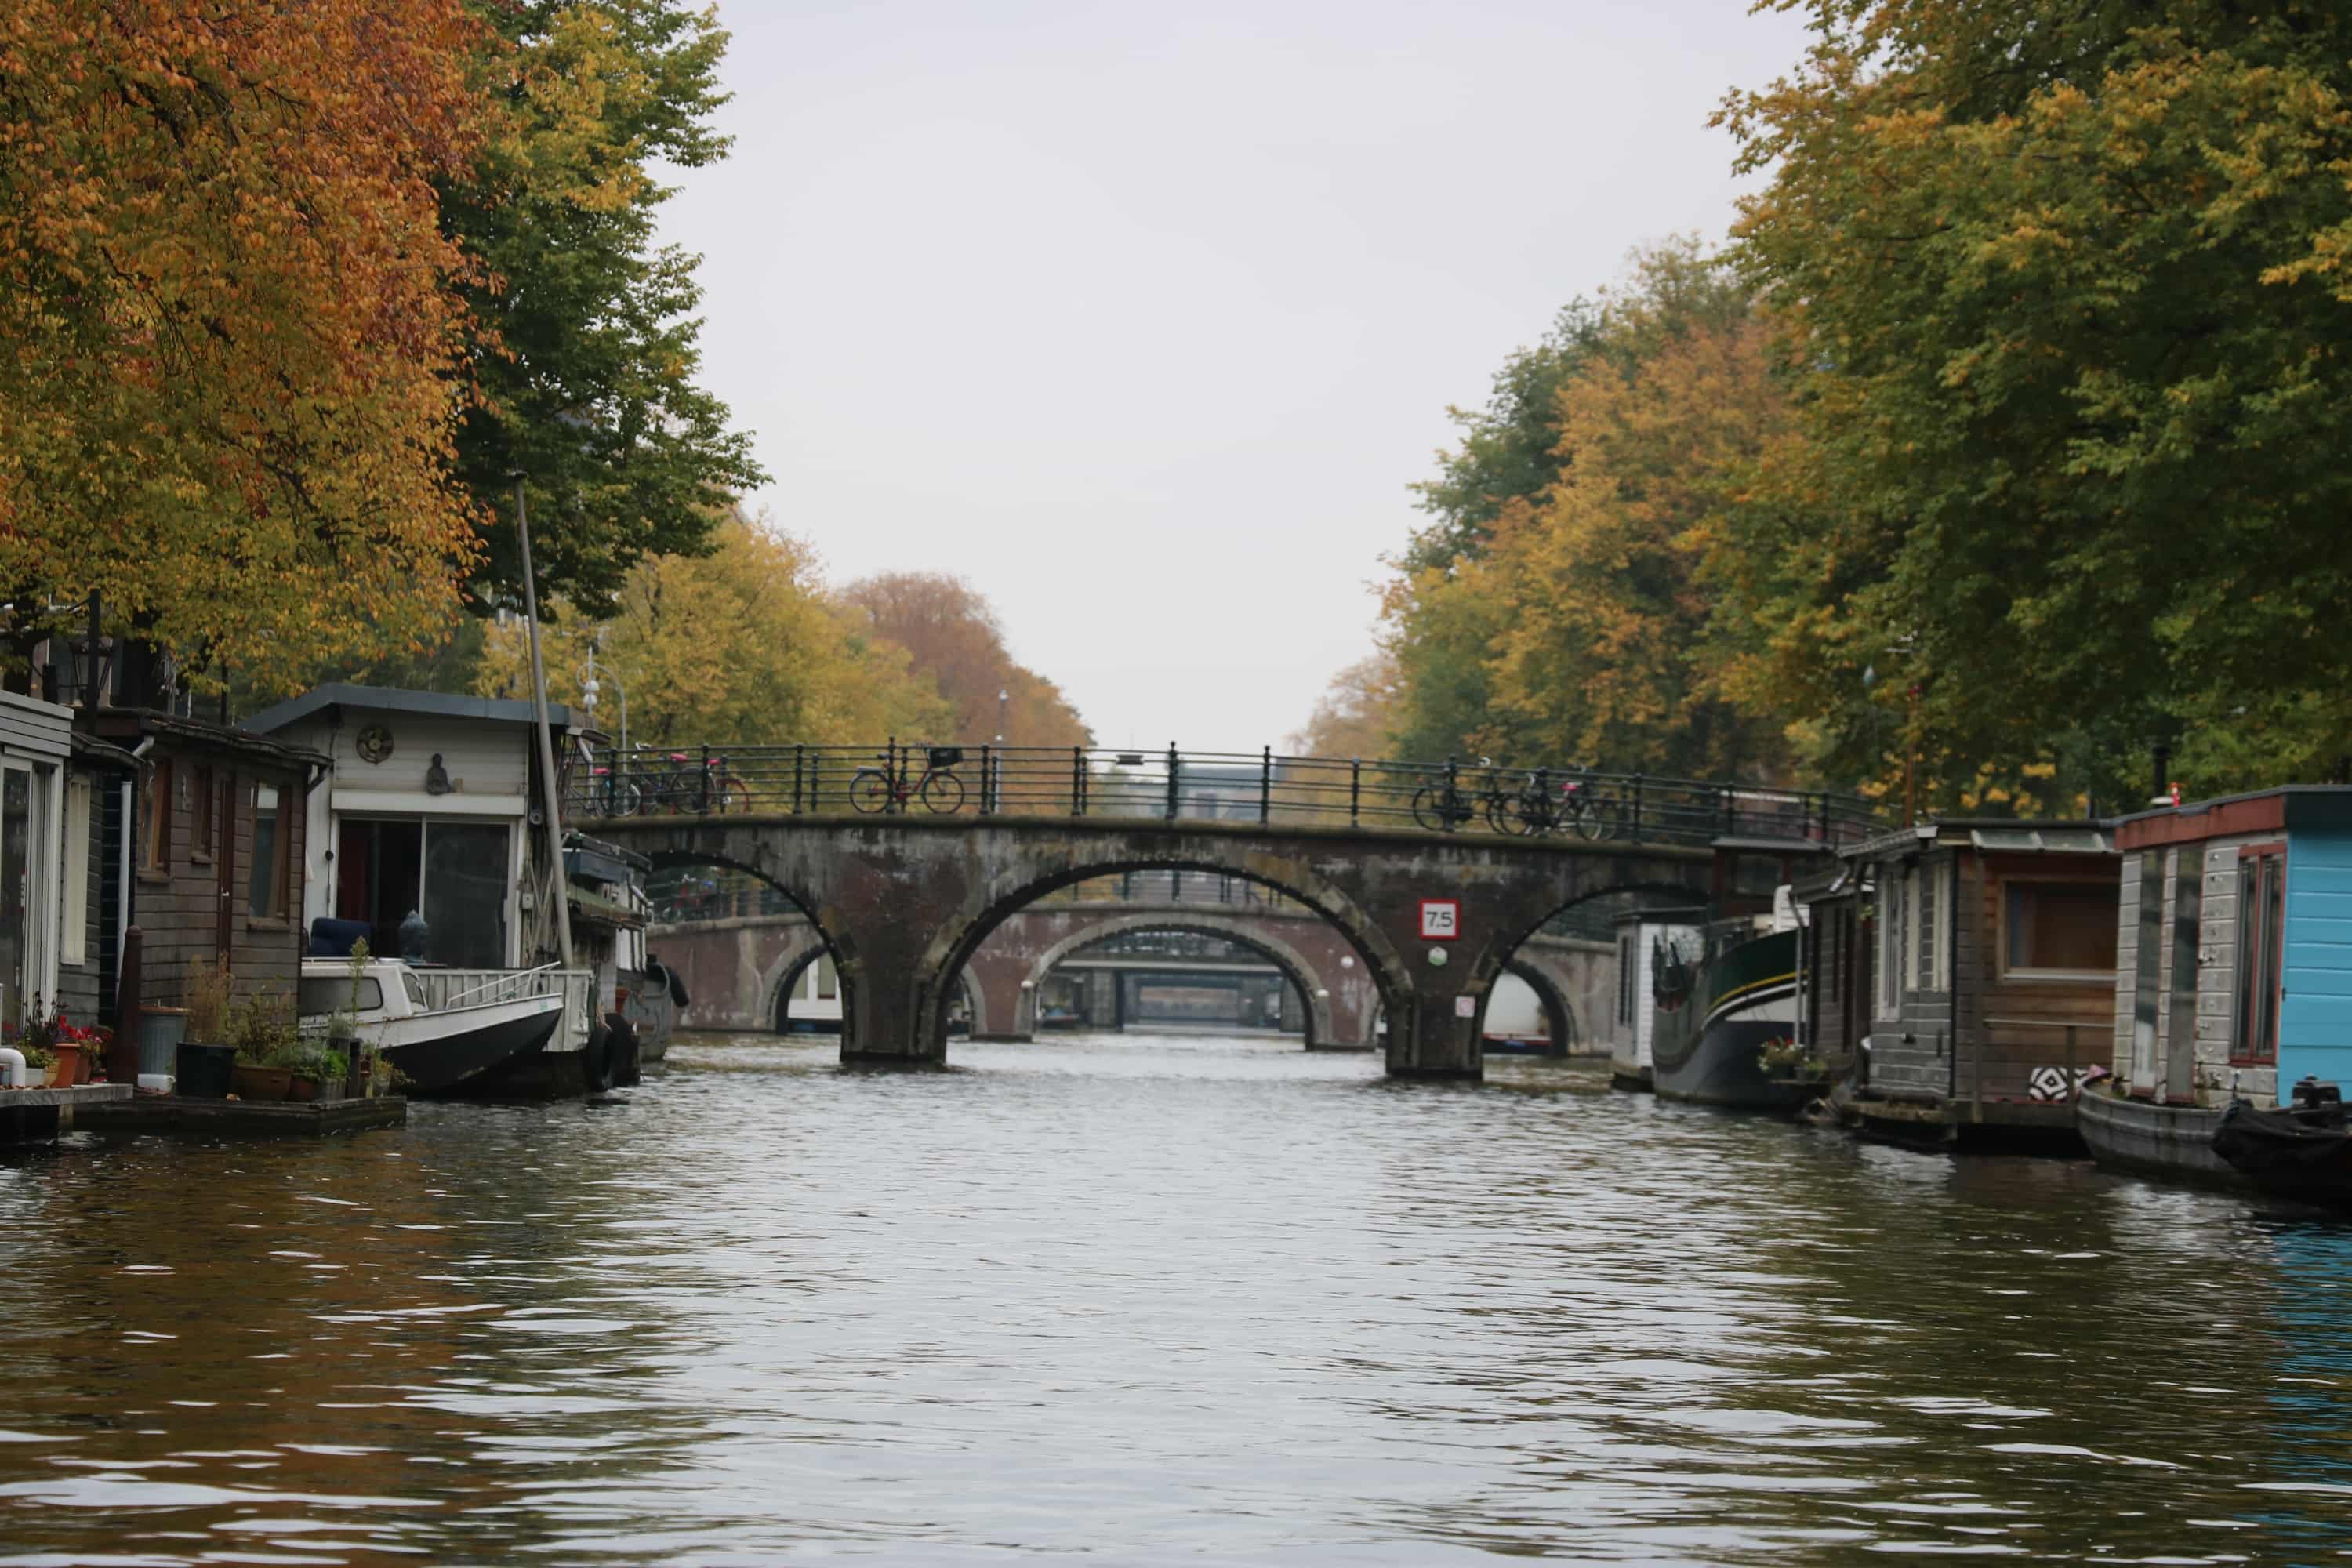 A grey sky over the murky waters of one of Amsterdam's canals. An arched bridge runs across the canal in the background.